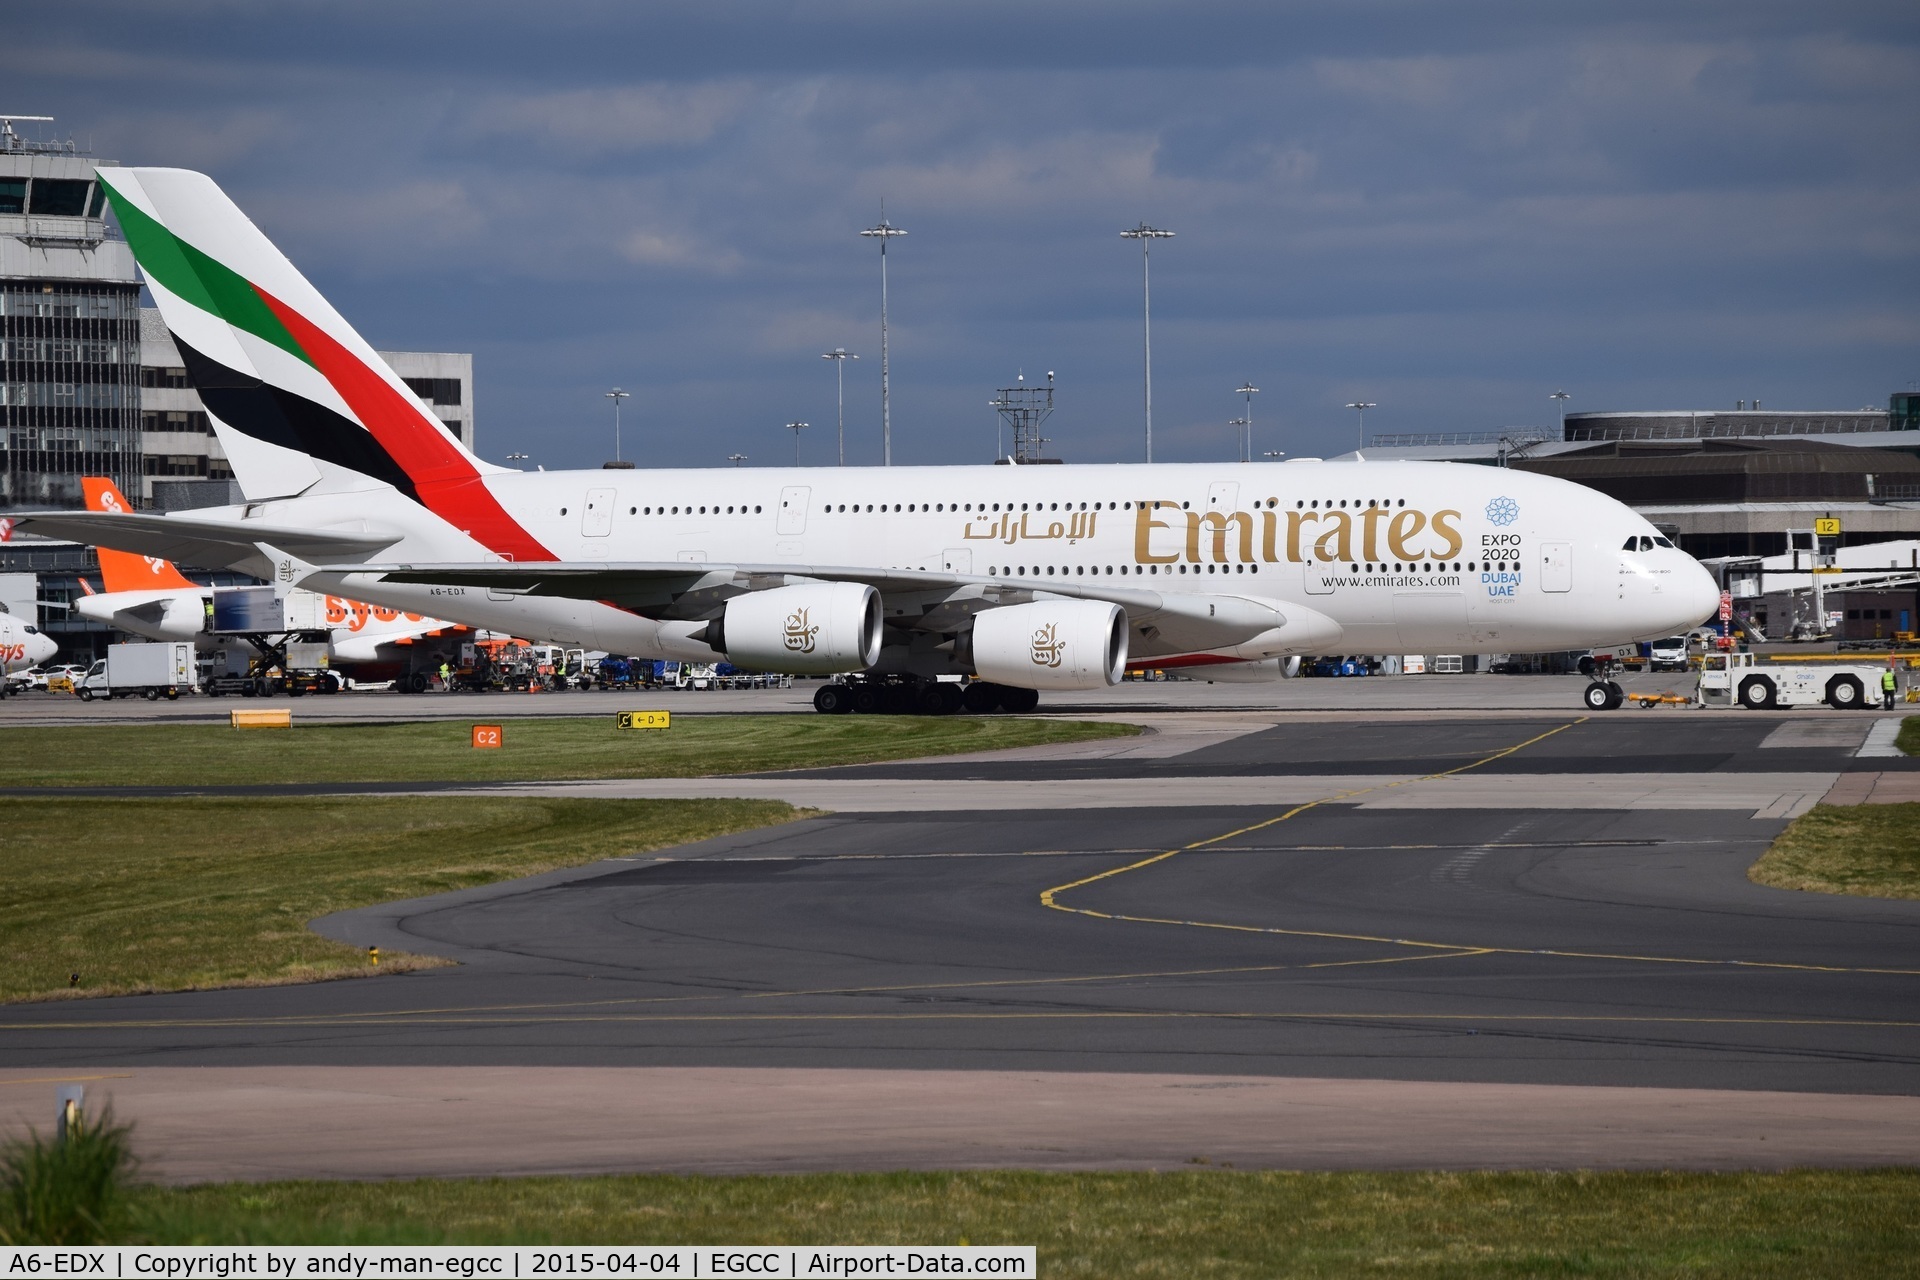 A6-EDX, 2012 Airbus A380-861 C/N 105, aircraft all set to taxi to the runway